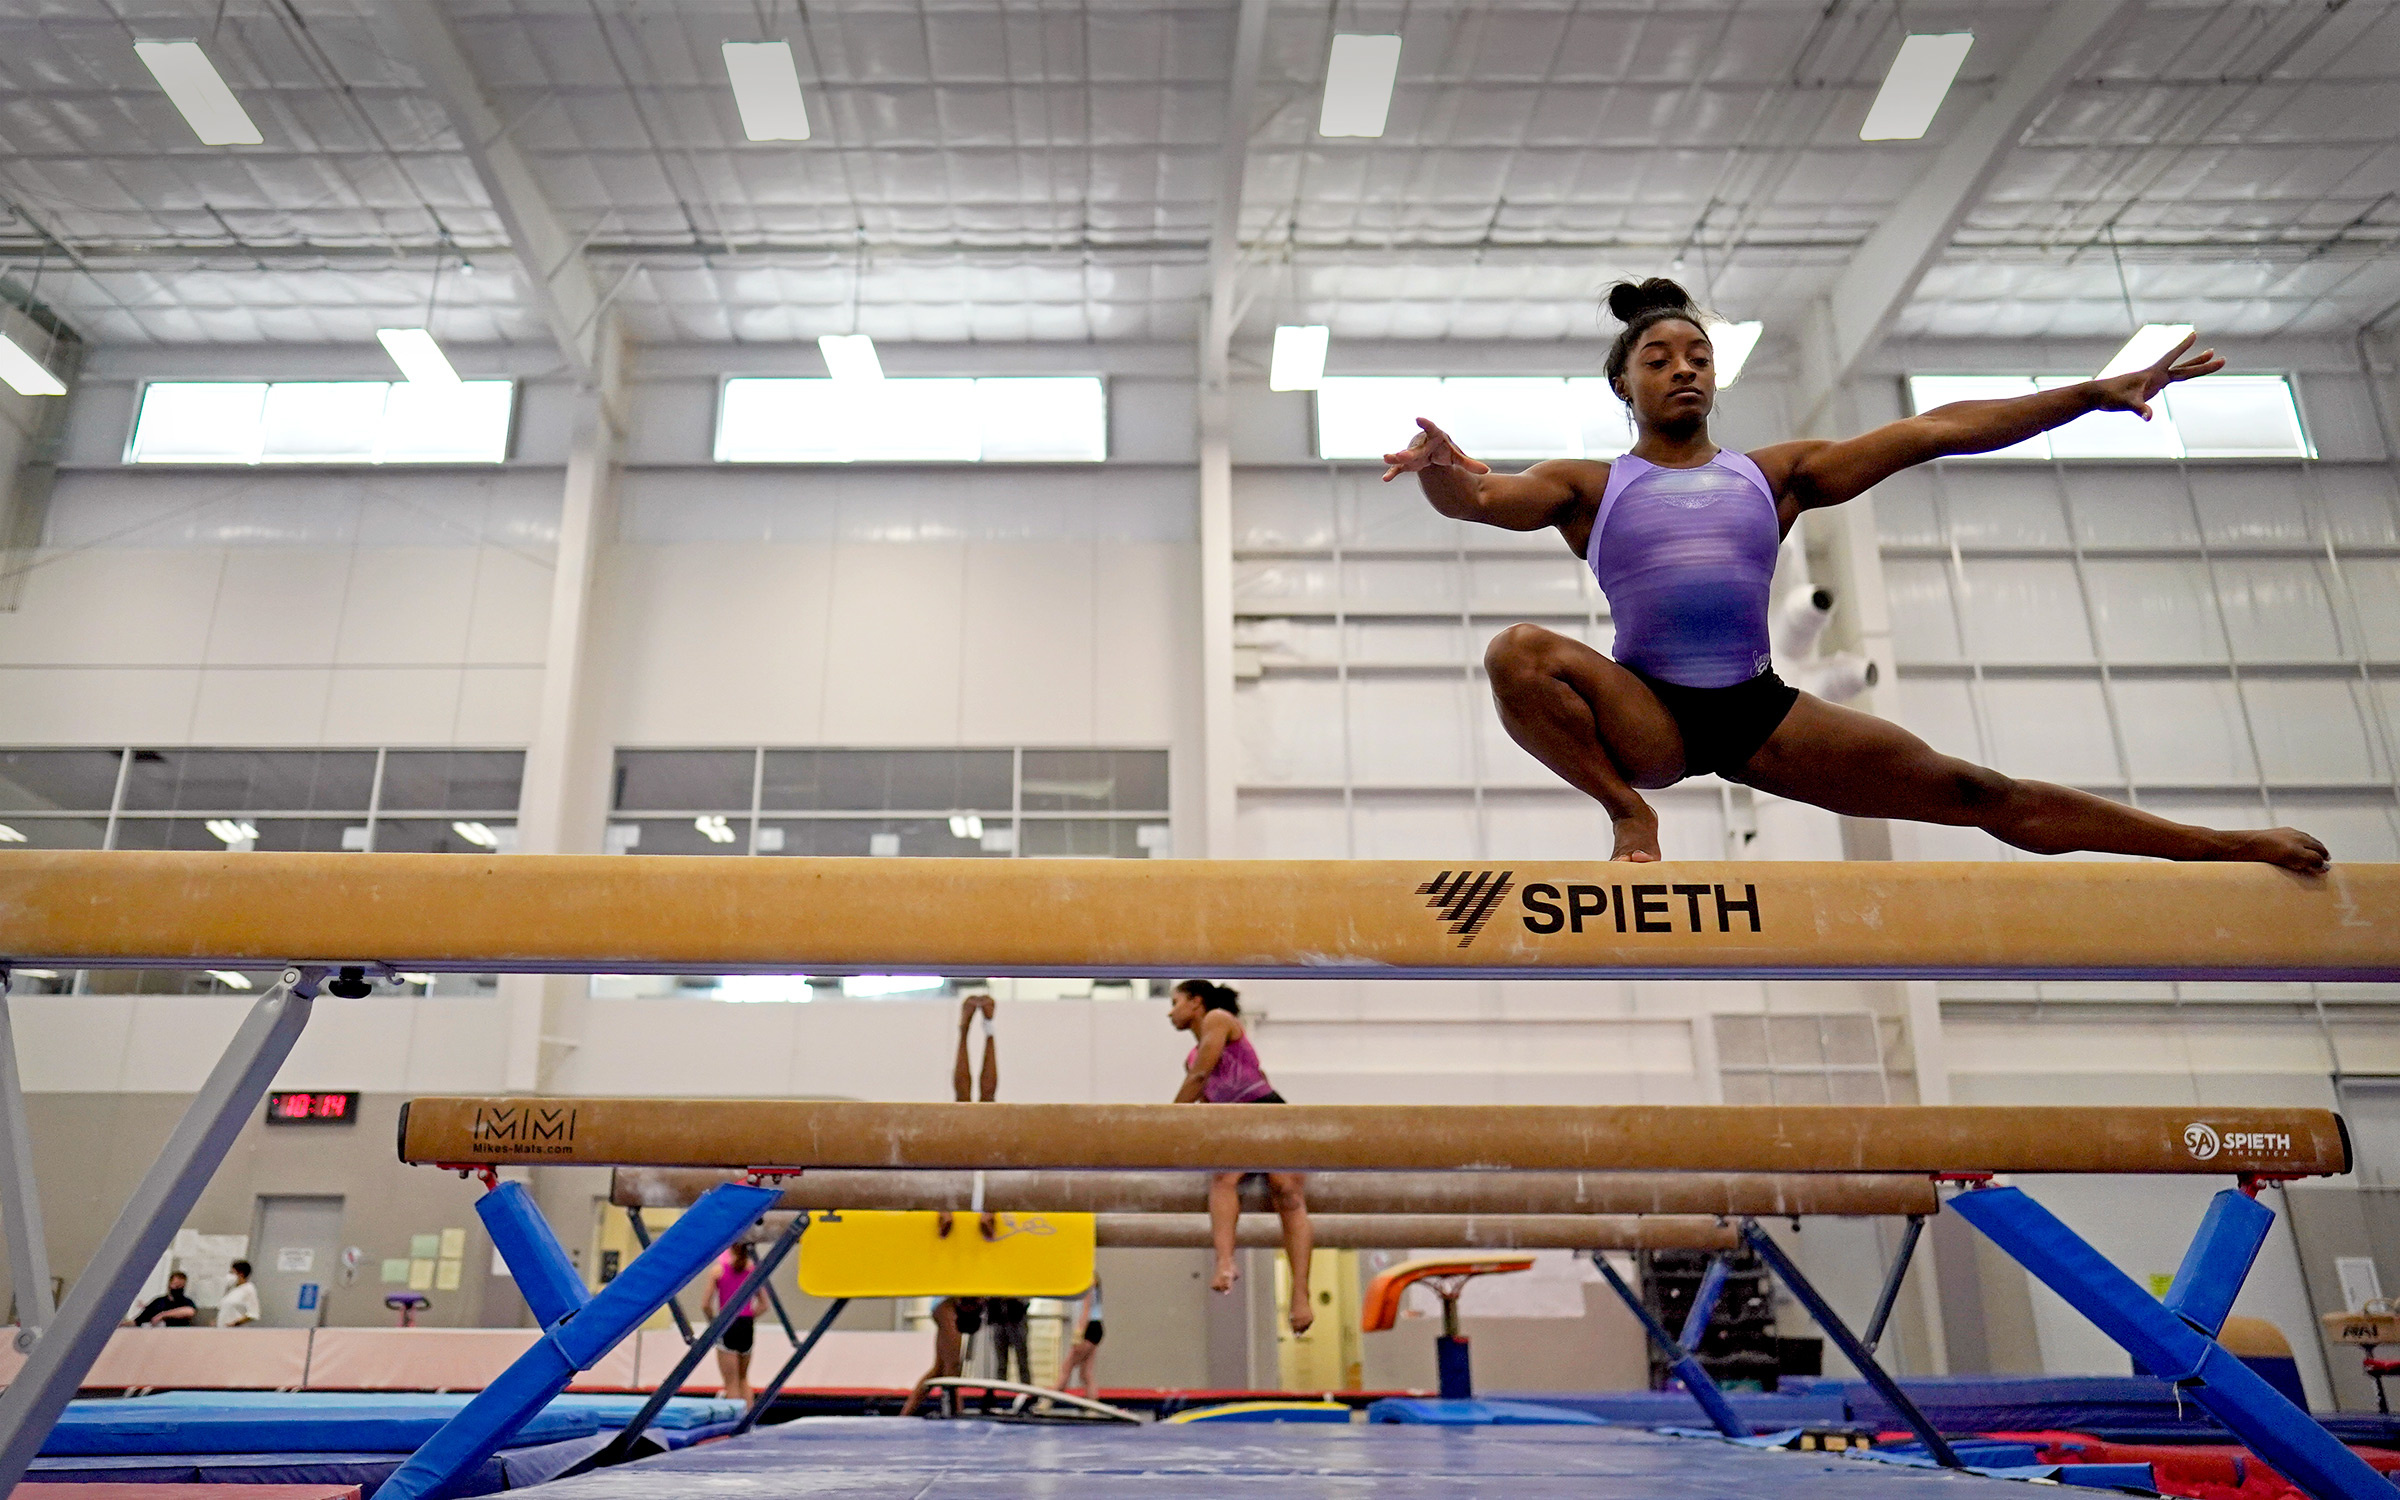 Balance Beam: Simone Biles during her training session, An American champion and artistic gymnast. 2400x1500 HD Wallpaper.